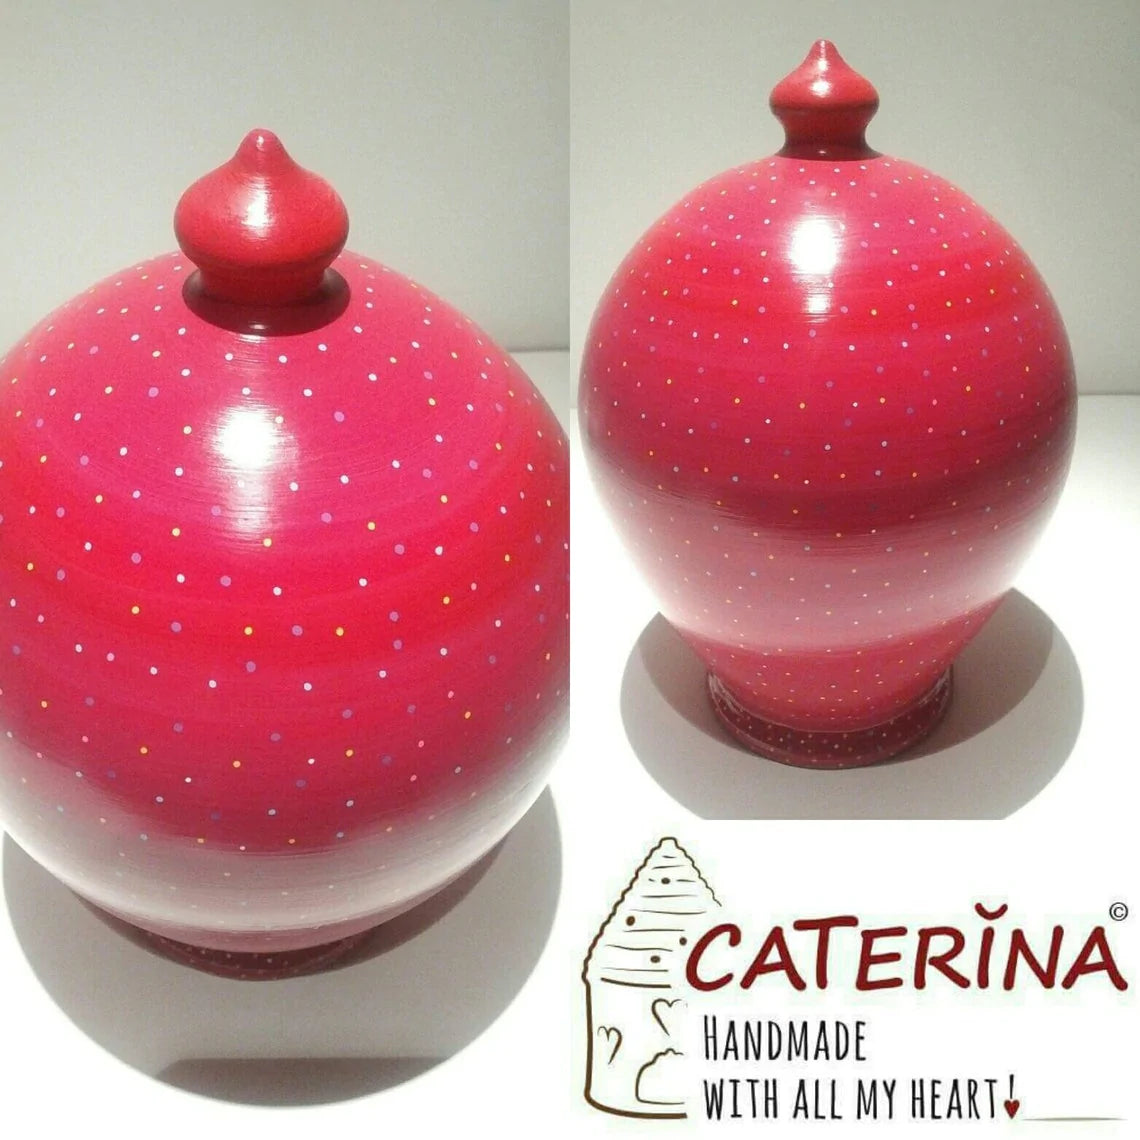 Curvy, gorgeous, precious and one of the most classy and thoughtful gifts for a man or a woman! Handmade and hand painted in my studio in Rome, Italy.  Size: 20 cm = 8 inches in height; circumference: 52 cm = 20 inch.  Colors: Shades of Pink + Multicolor dots.  With hole and stopper plug, or without hole.